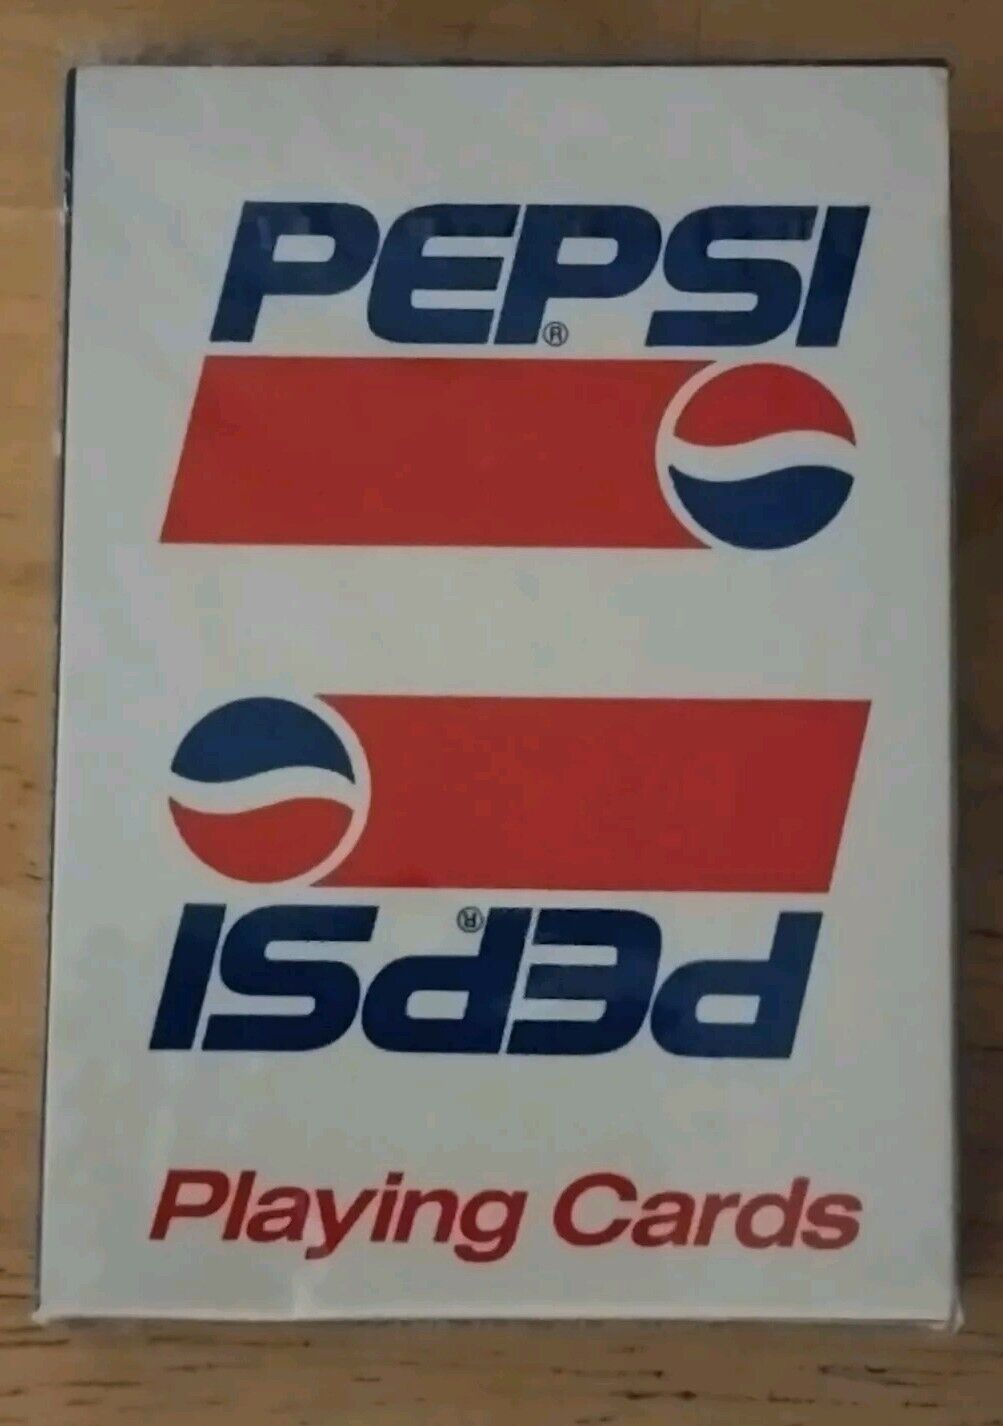 Vintage 1980s Pepsi Promo Playing Cards #355 Plastic Coated Sealed In Wrapping 